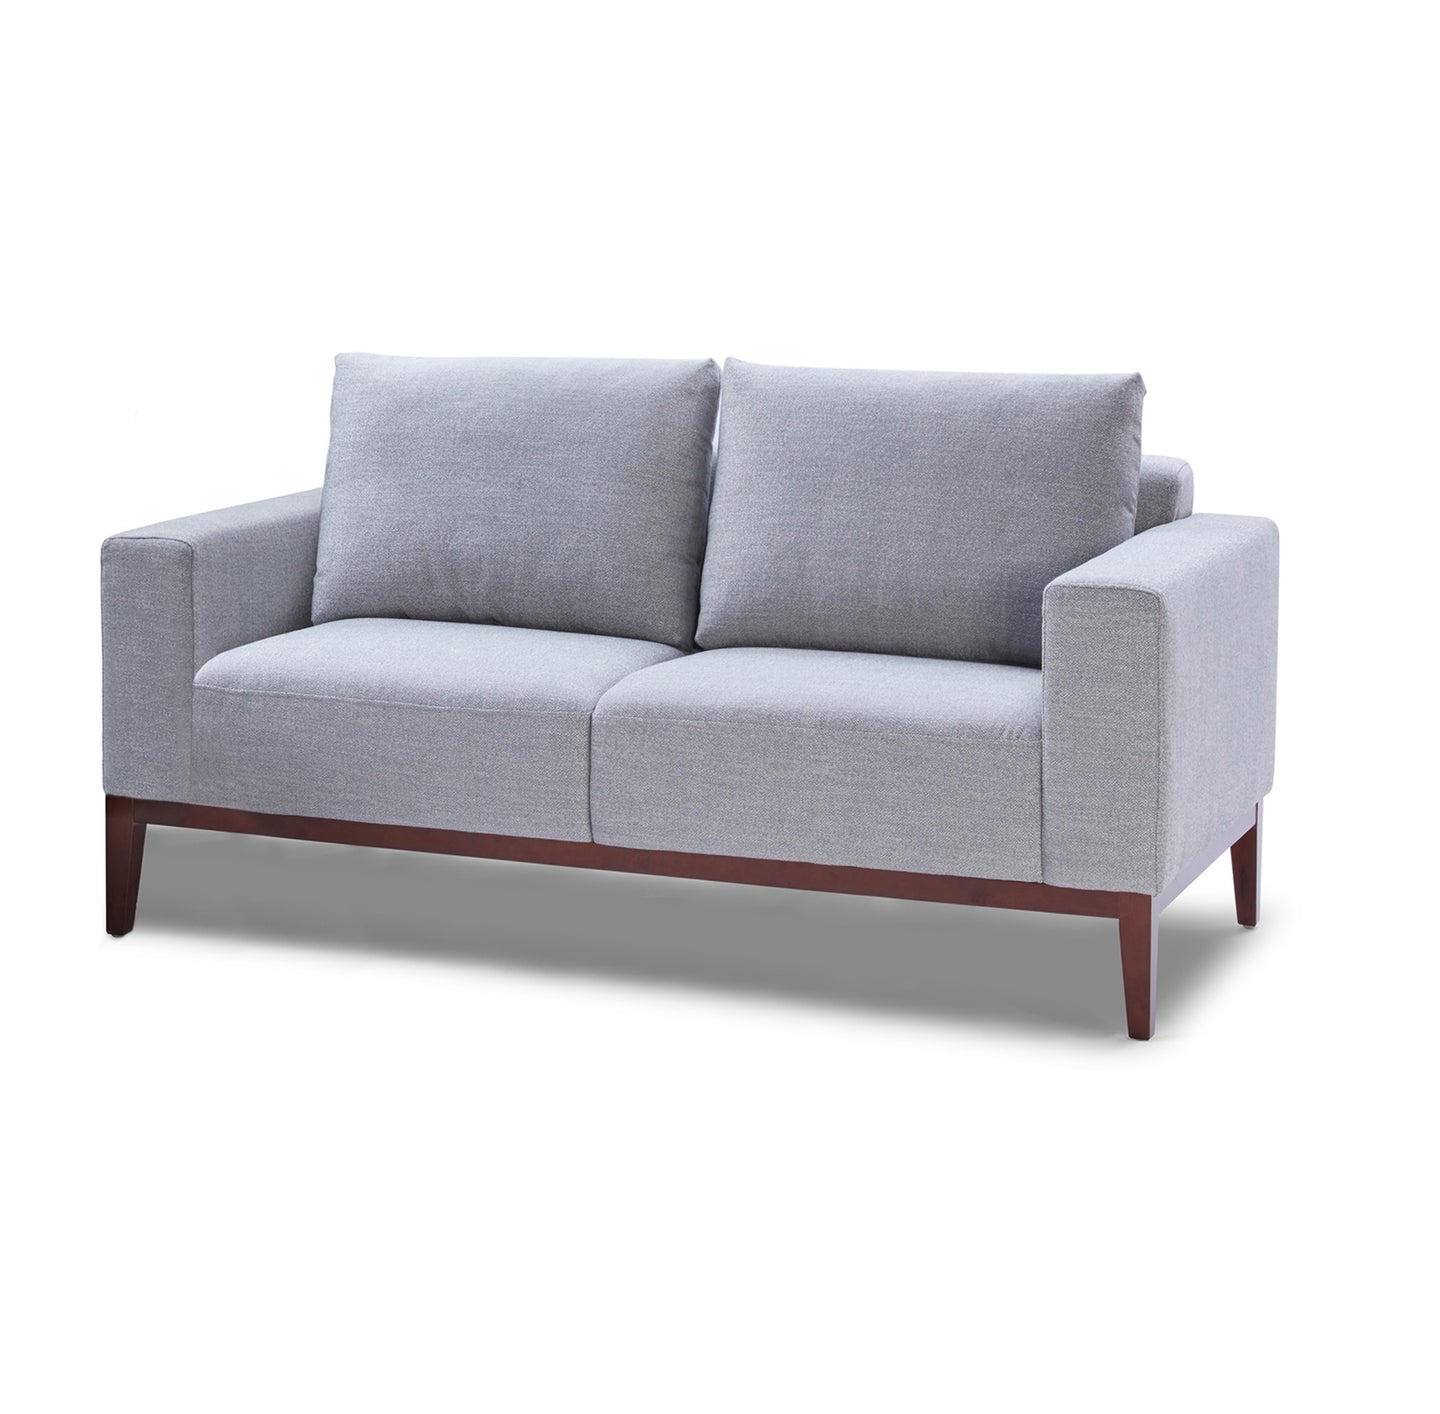 Cortesi Home Roma Loveseat in Soft Grey Fabric with Wood Legs, 64